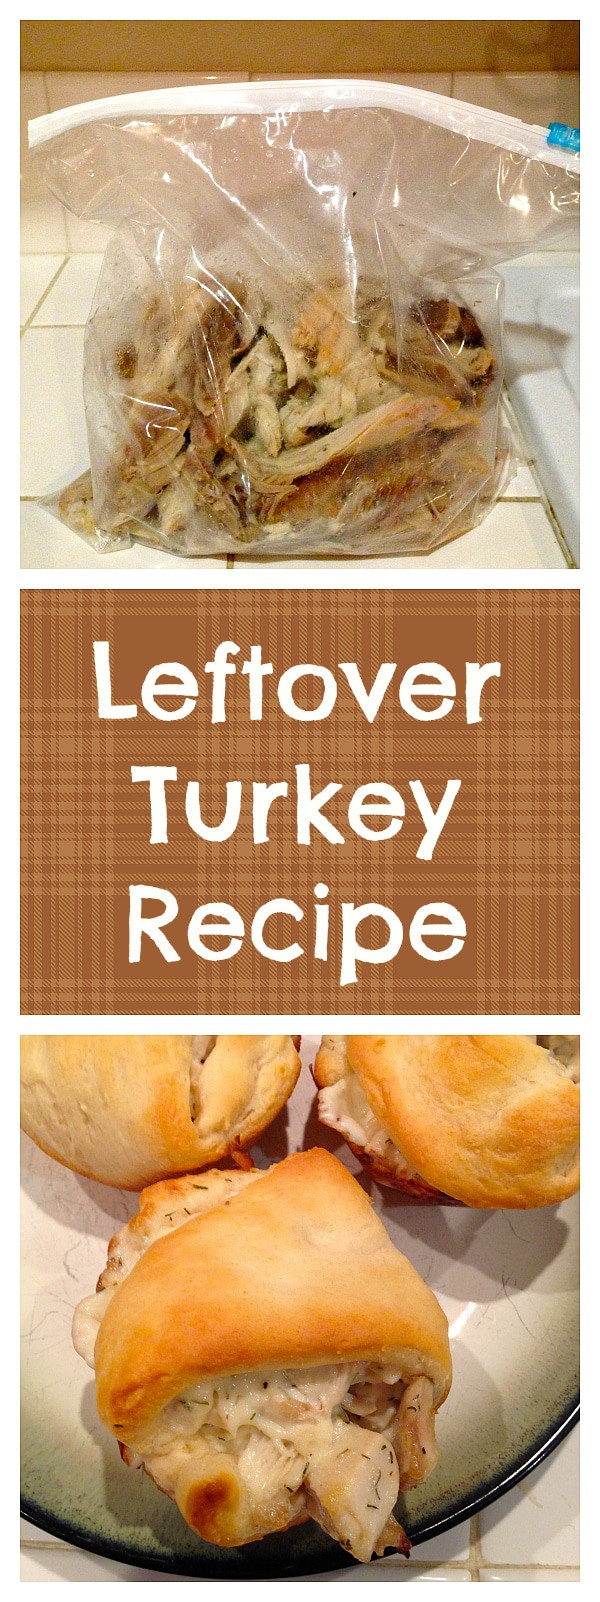 Thanksgiving Turkey Leftover Recipes
 Best Leftover Turkey Recipe · The Typical Mom